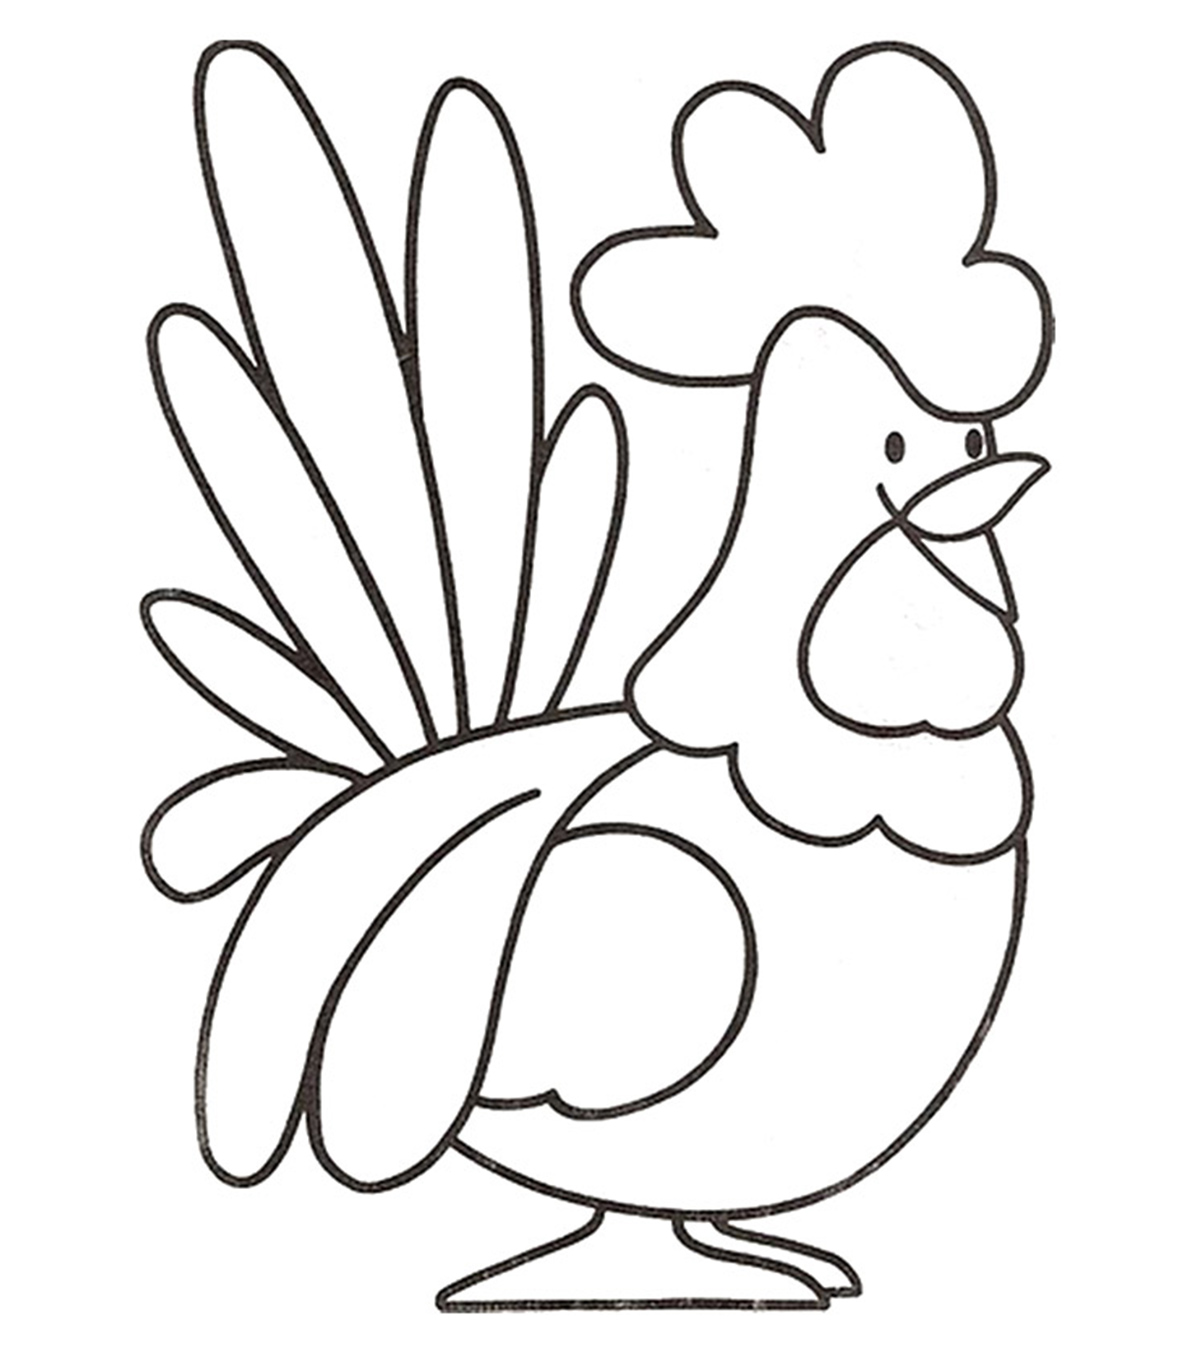 Top 10 Rooster Coloring Pages Your Toddler Will Love To Color_image